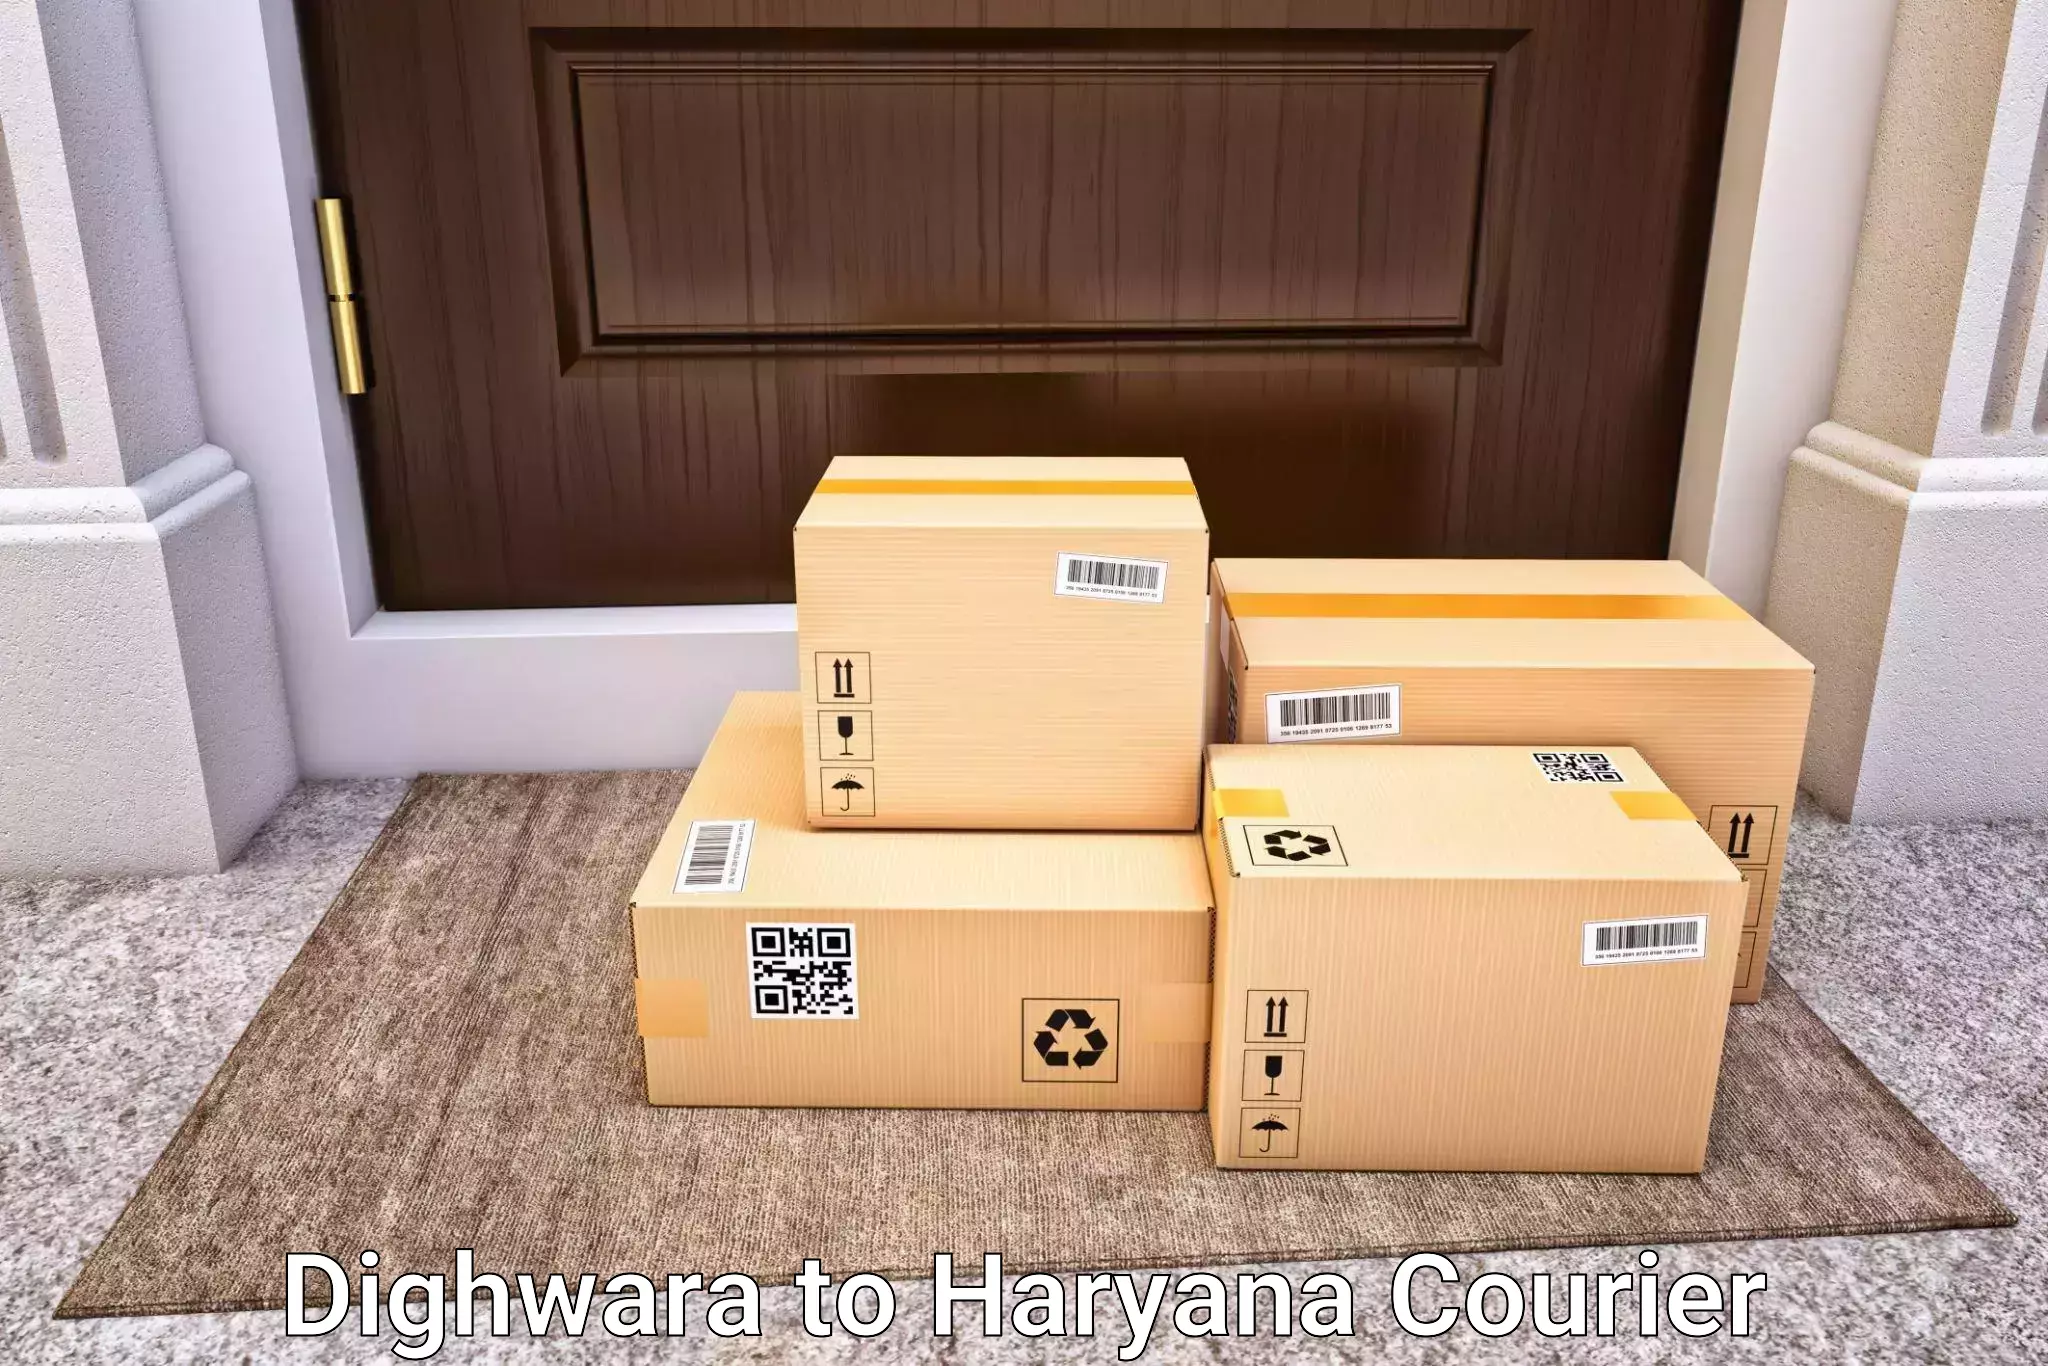 Luggage delivery network Dighwara to Sonipat